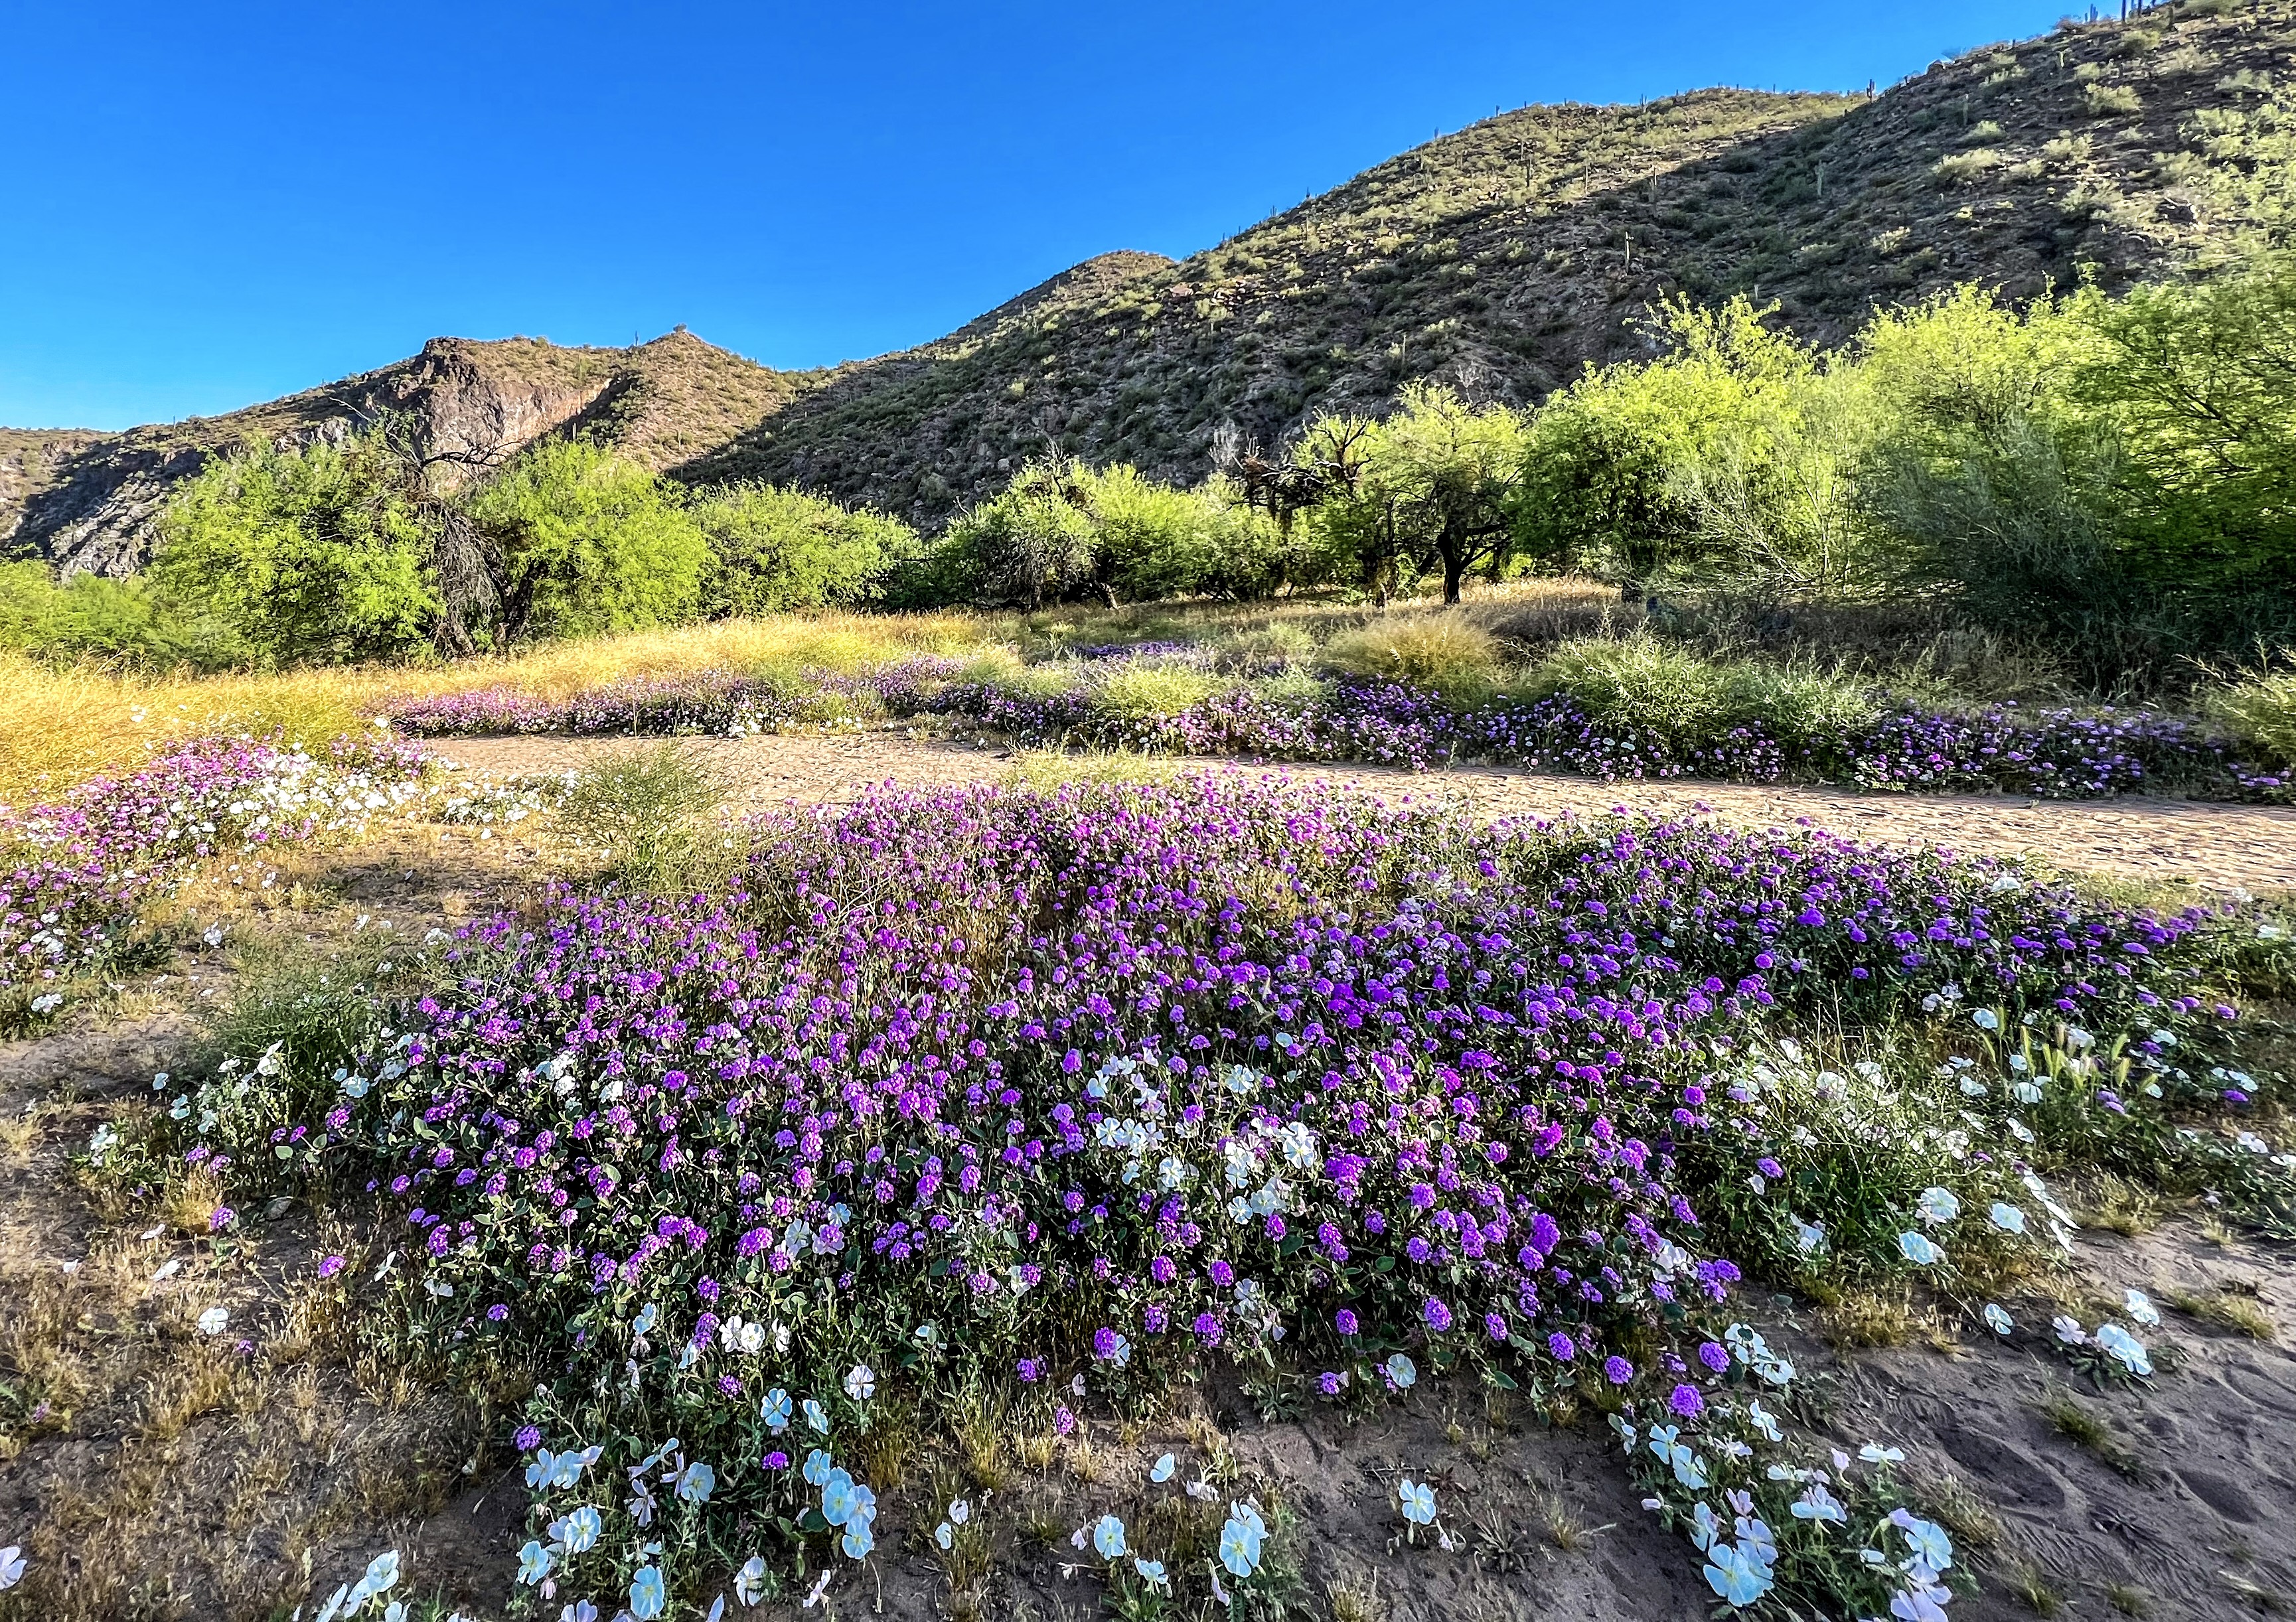 Photo by Lisa Renee Ludlum  |  Spring wildflowers blanket the landscapes of AZ